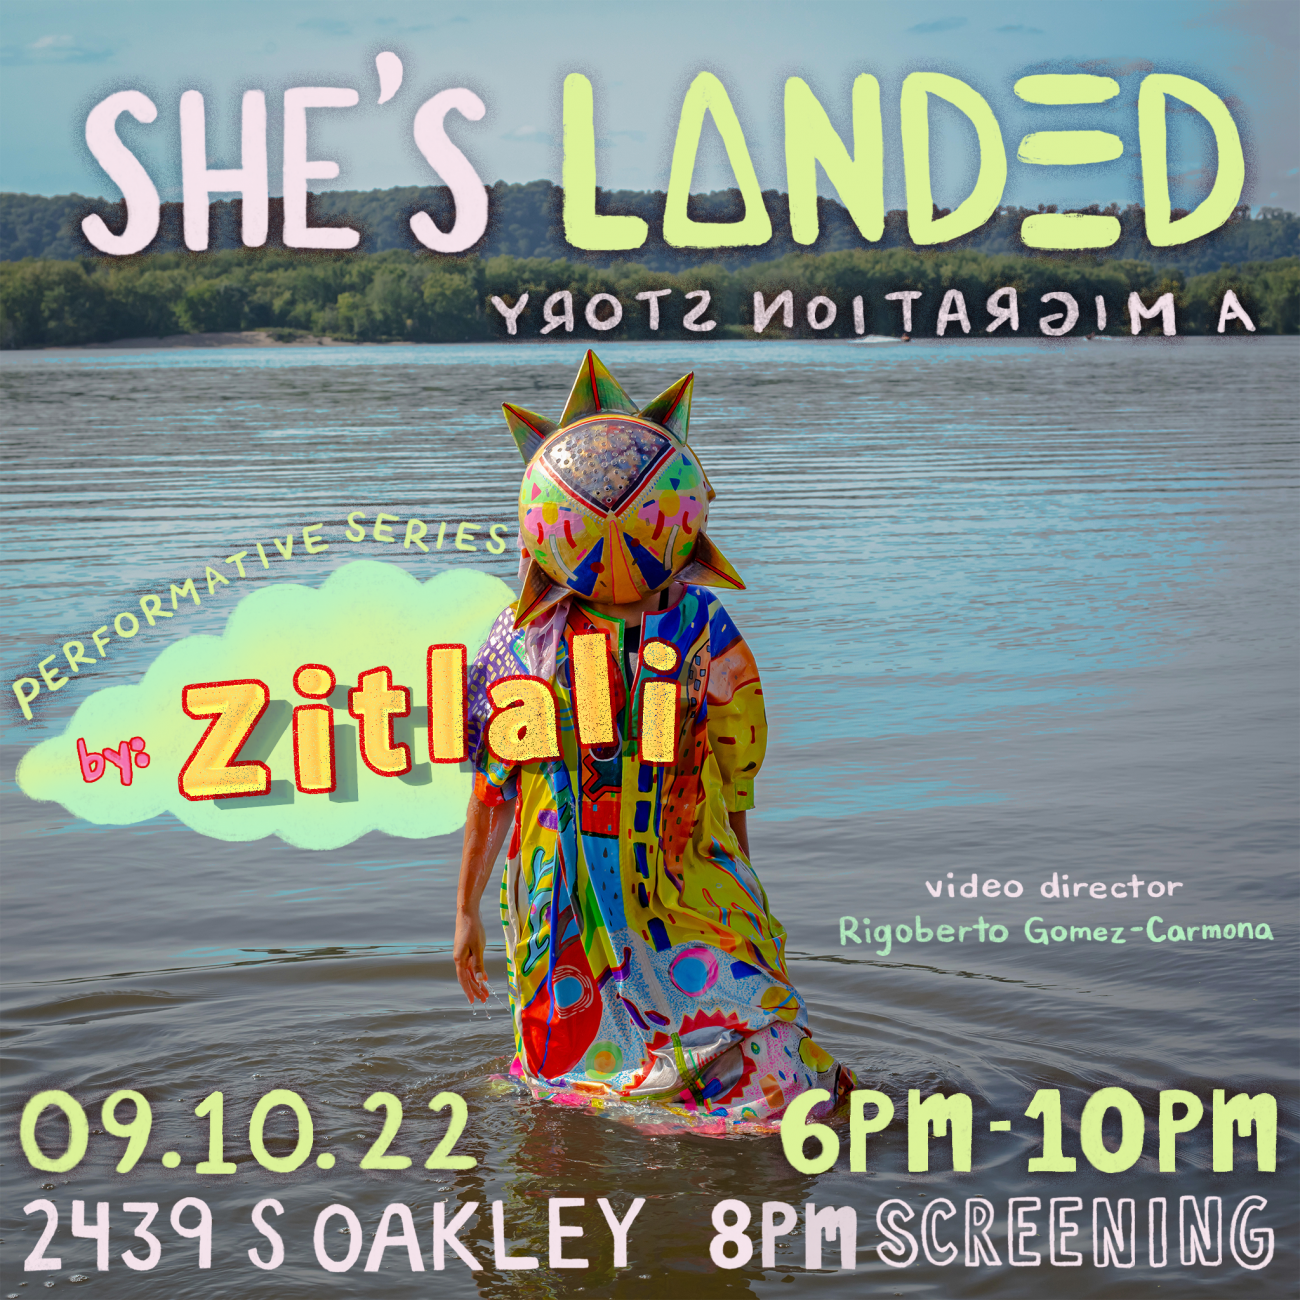 Image of the artist dressed in a colorful costume wading in water. Test over the image gives the details of the screening "She's landed a migration story, performative series by Zitlali"